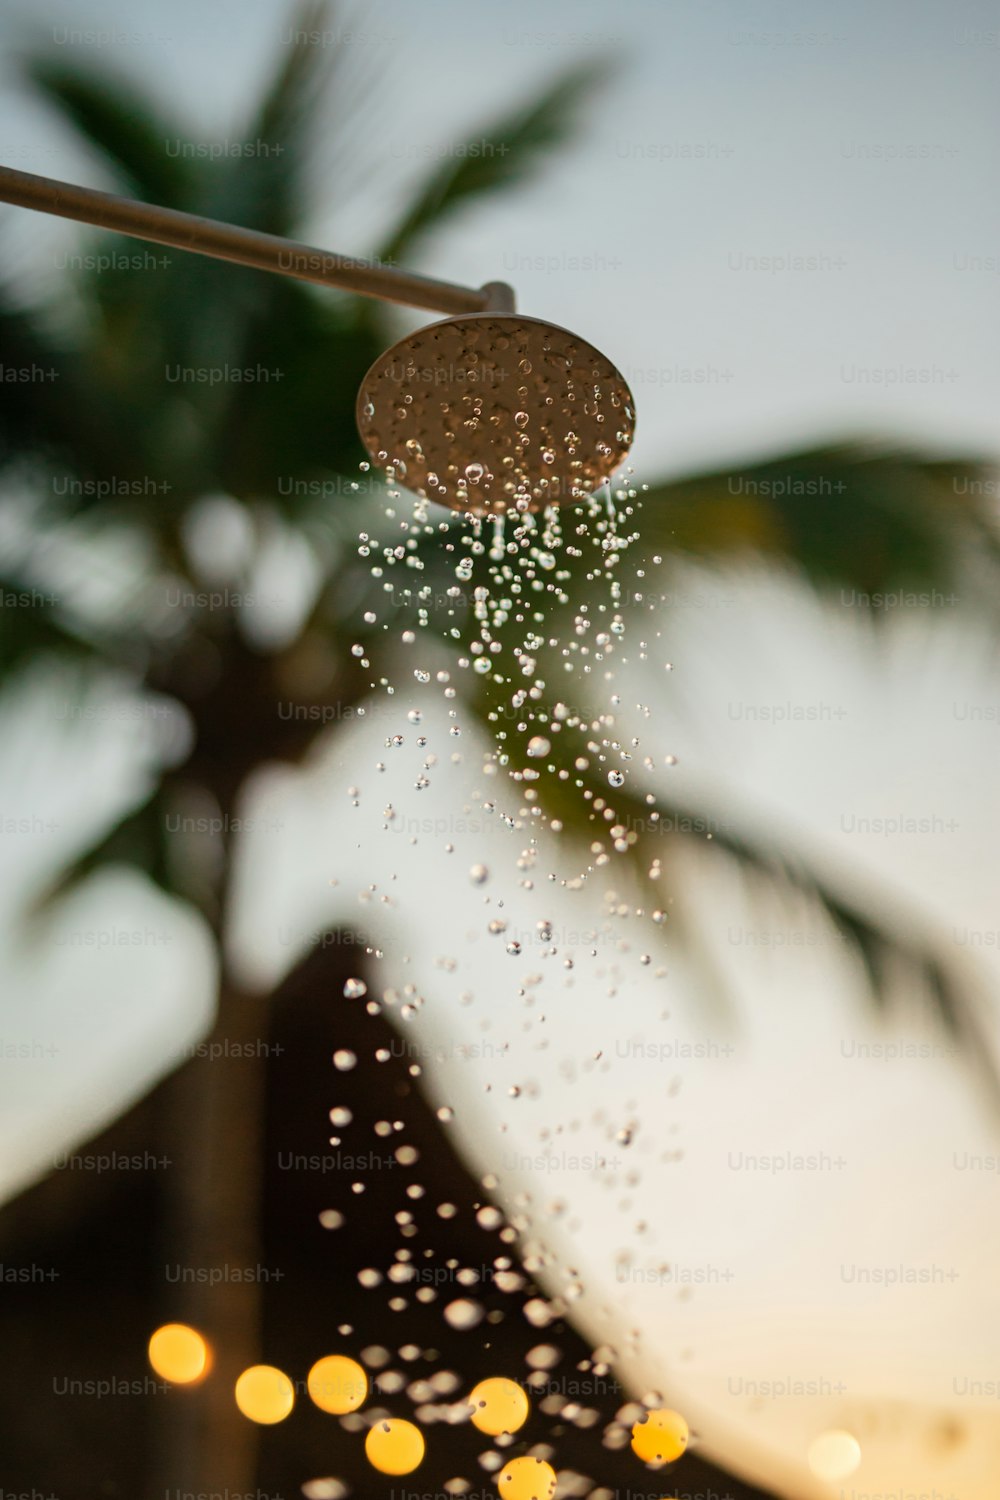 a close up of a shower head with a palm tree in the background